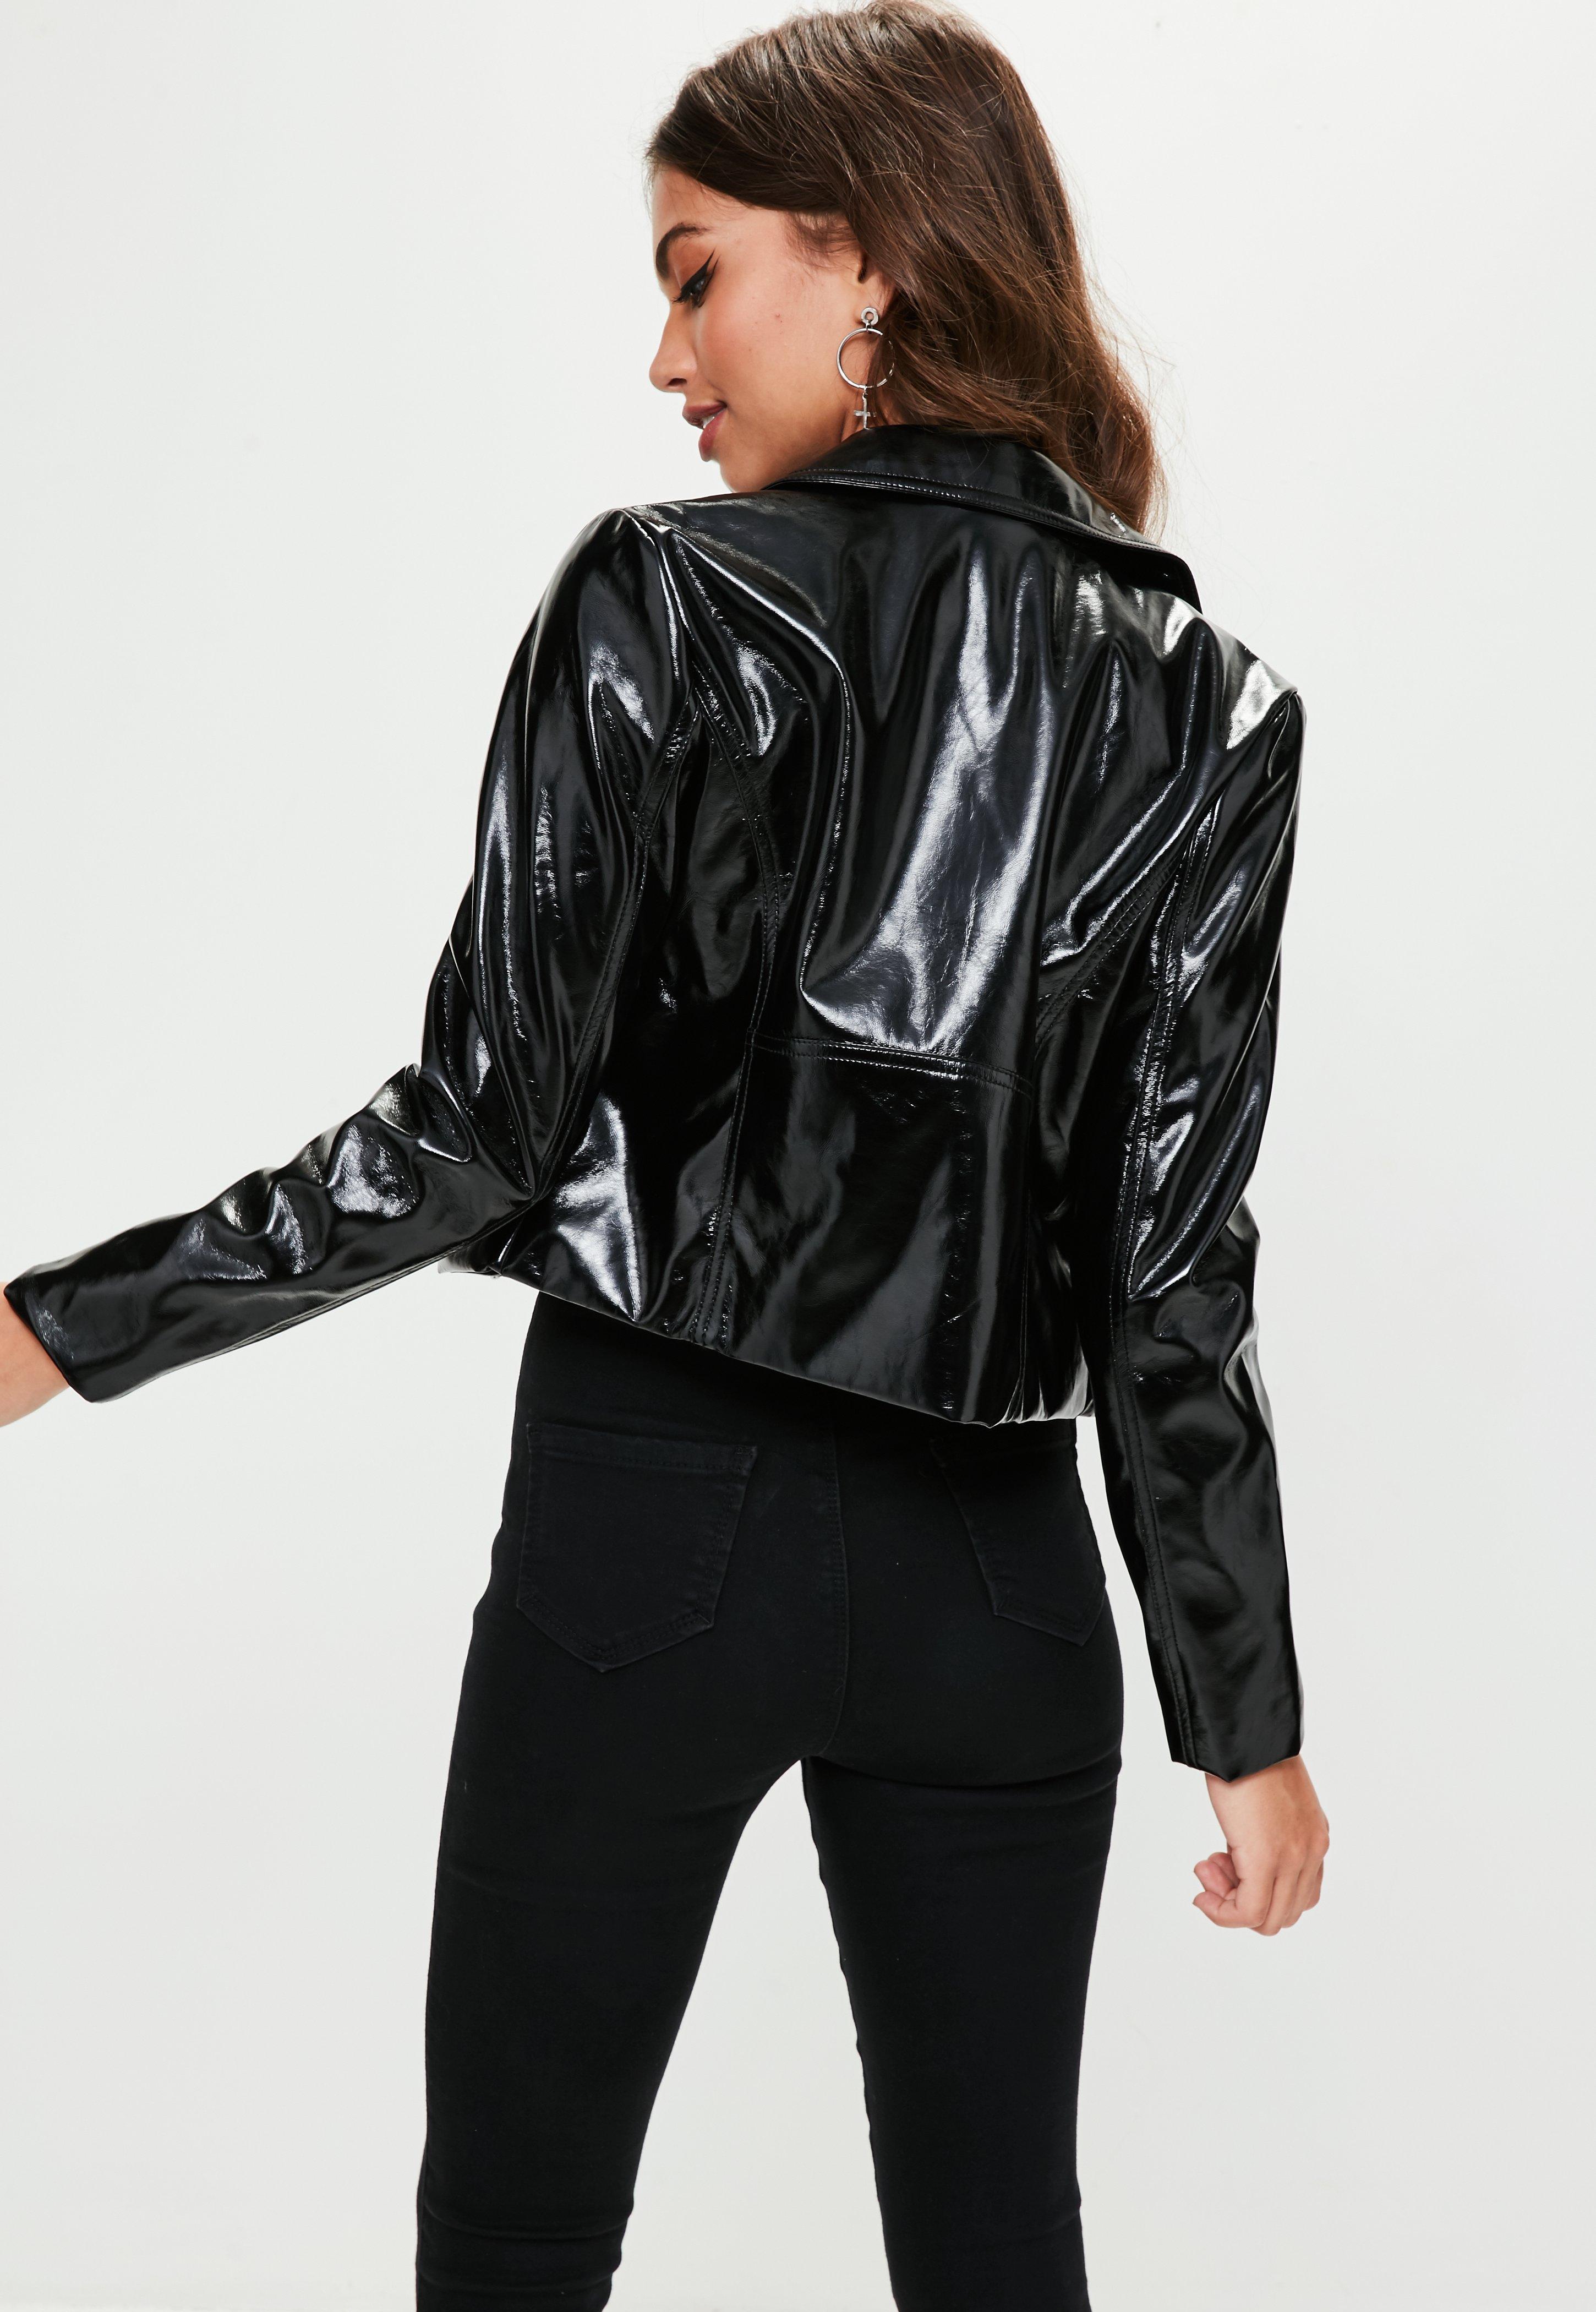 Lyst - Missguided Black Patent Faux Leather Biker Jacket in Black